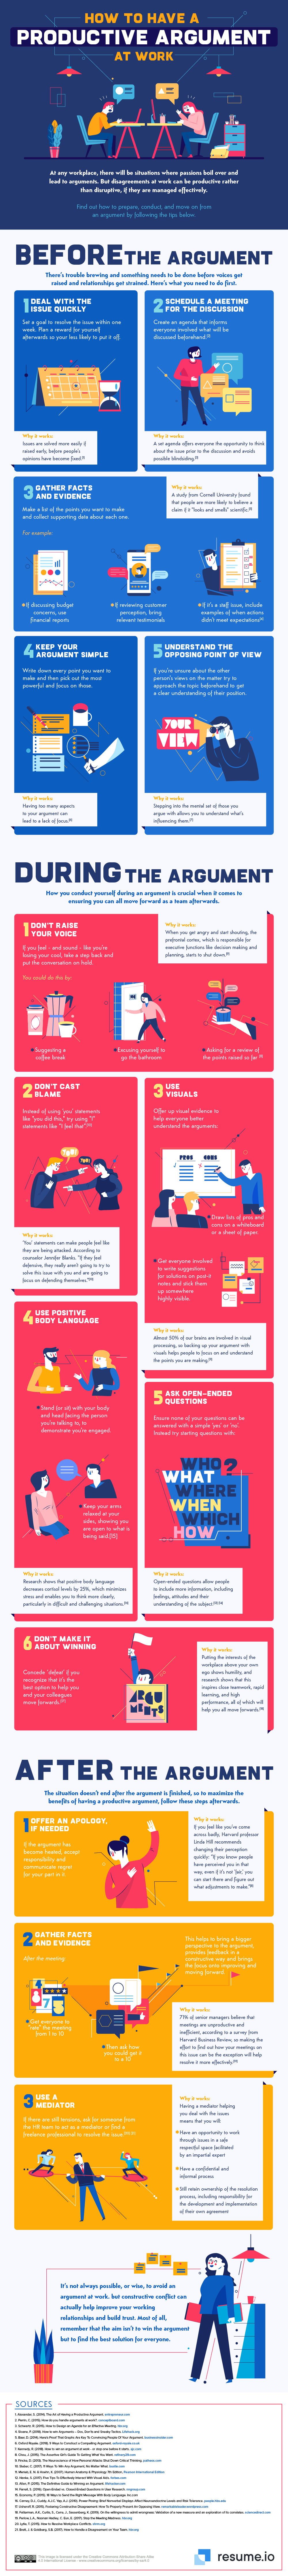 How-to-have-a-productive-argument-at-work